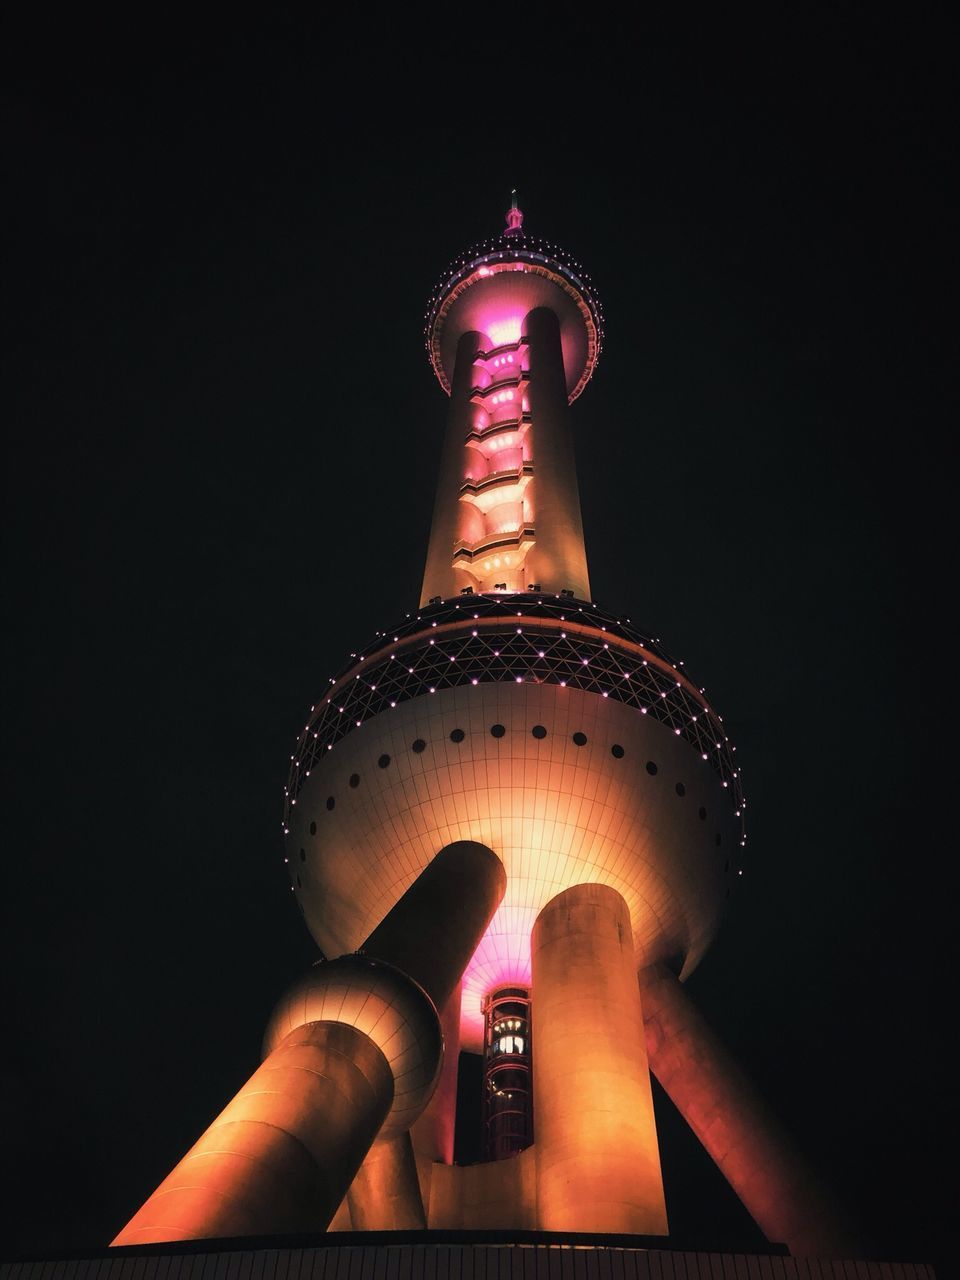 PERSON HOLDING ILLUMINATED TOWER AGAINST SKY AT NIGHT